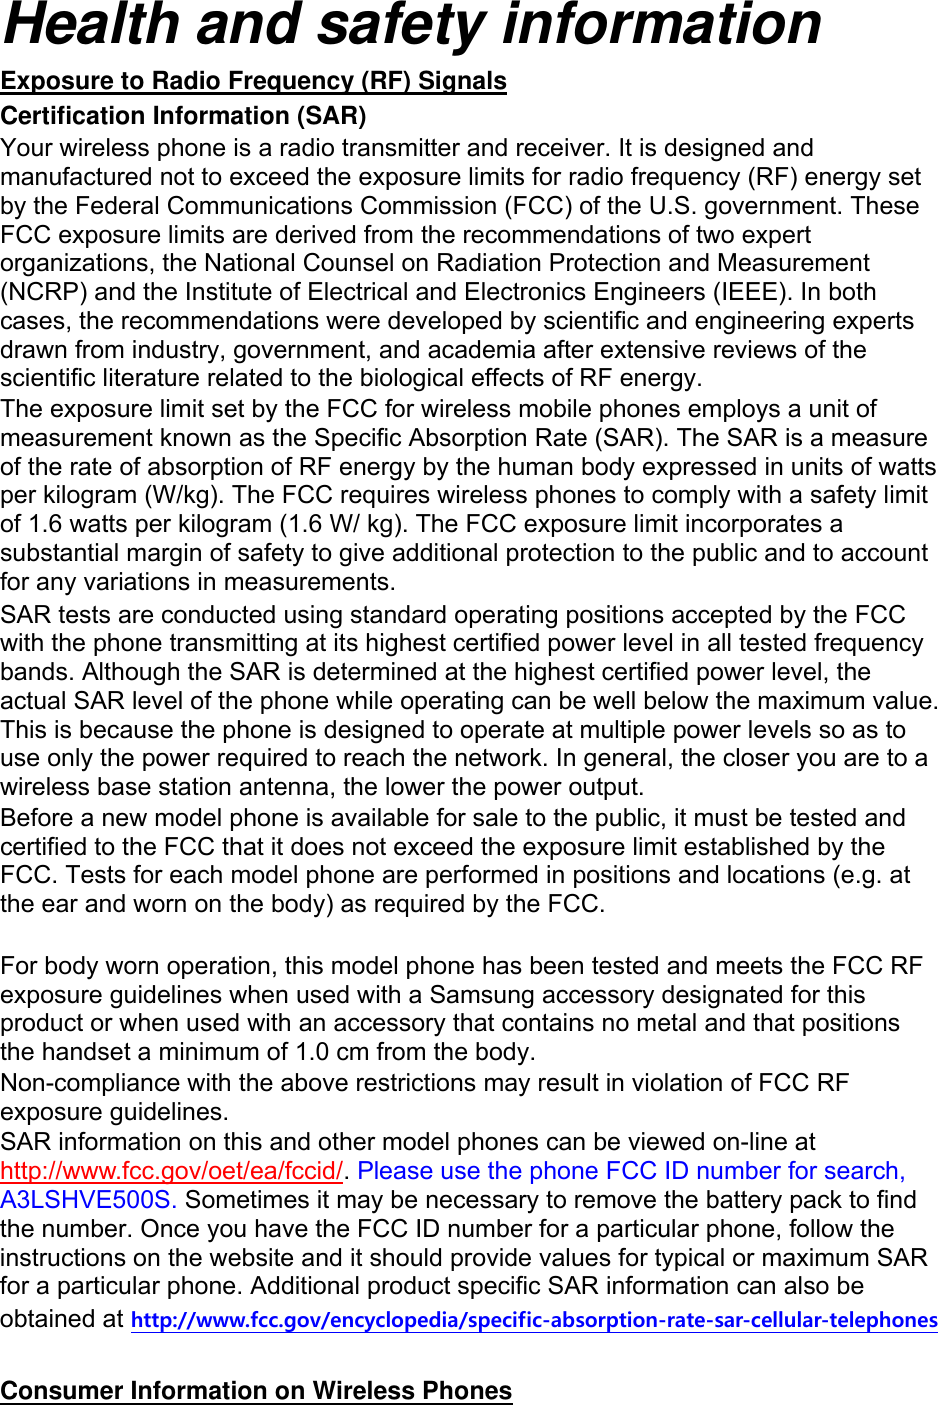 Health and safety information Exposure to Radio Frequency (RF) Signals Certification Information (SAR) Your wireless phone is a radio transmitter and receiver. It is designed and manufactured not to exceed the exposure limits for radio frequency (RF) energy set by the Federal Communications Commission (FCC) of the U.S. government. These FCC exposure limits are derived from the recommendations of two expert organizations, the National Counsel on Radiation Protection and Measurement (NCRP) and the Institute of Electrical and Electronics Engineers (IEEE). In both cases, the recommendations were developed by scientific and engineering experts drawn from industry, government, and academia after extensive reviews of the scientific literature related to the biological effects of RF energy. The exposure limit set by the FCC for wireless mobile phones employs a unit of measurement known as the Specific Absorption Rate (SAR). The SAR is a measure of the rate of absorption of RF energy by the human body expressed in units of watts per kilogram (W/kg). The FCC requires wireless phones to comply with a safety limit of 1.6 watts per kilogram (1.6 W/ kg). The FCC exposure limit incorporates a substantial margin of safety to give additional protection to the public and to account for any variations in measurements. SAR tests are conducted using standard operating positions accepted by the FCC with the phone transmitting at its highest certified power level in all tested frequency bands. Although the SAR is determined at the highest certified power level, the actual SAR level of the phone while operating can be well below the maximum value. This is because the phone is designed to operate at multiple power levels so as to use only the power required to reach the network. In general, the closer you are to a wireless base station antenna, the lower the power output. Before a new model phone is available for sale to the public, it must be tested and certified to the FCC that it does not exceed the exposure limit established by the FCC. Tests for each model phone are performed in positions and locations (e.g. at the ear and worn on the body) as required by the FCC.     For body worn operation, this model phone has been tested and meets the FCC RF exposure guidelines when used with a Samsung accessory designated for this product or when used with an accessory that contains no metal and that positions the handset a minimum of 1.0 cm from the body.   Non-compliance with the above restrictions may result in violation of FCC RF exposure guidelines. SAR information on this and other model phones can be viewed on-line at http://www.fcc.gov/oet/ea/fccid/. Please use the phone FCC ID number for search, A3LSHVE500S. Sometimes it may be necessary to remove the battery pack to find the number. Once you have the FCC ID number for a particular phone, follow the instructions on the website and it should provide values for typical or maximum SAR for a particular phone. Additional product specific SAR information can also be obtained at http://www.fcc.gov/encyclopedia/specific-absorption-rate-sar-cellular-telephonesConsumer Information on Wireless Phones 